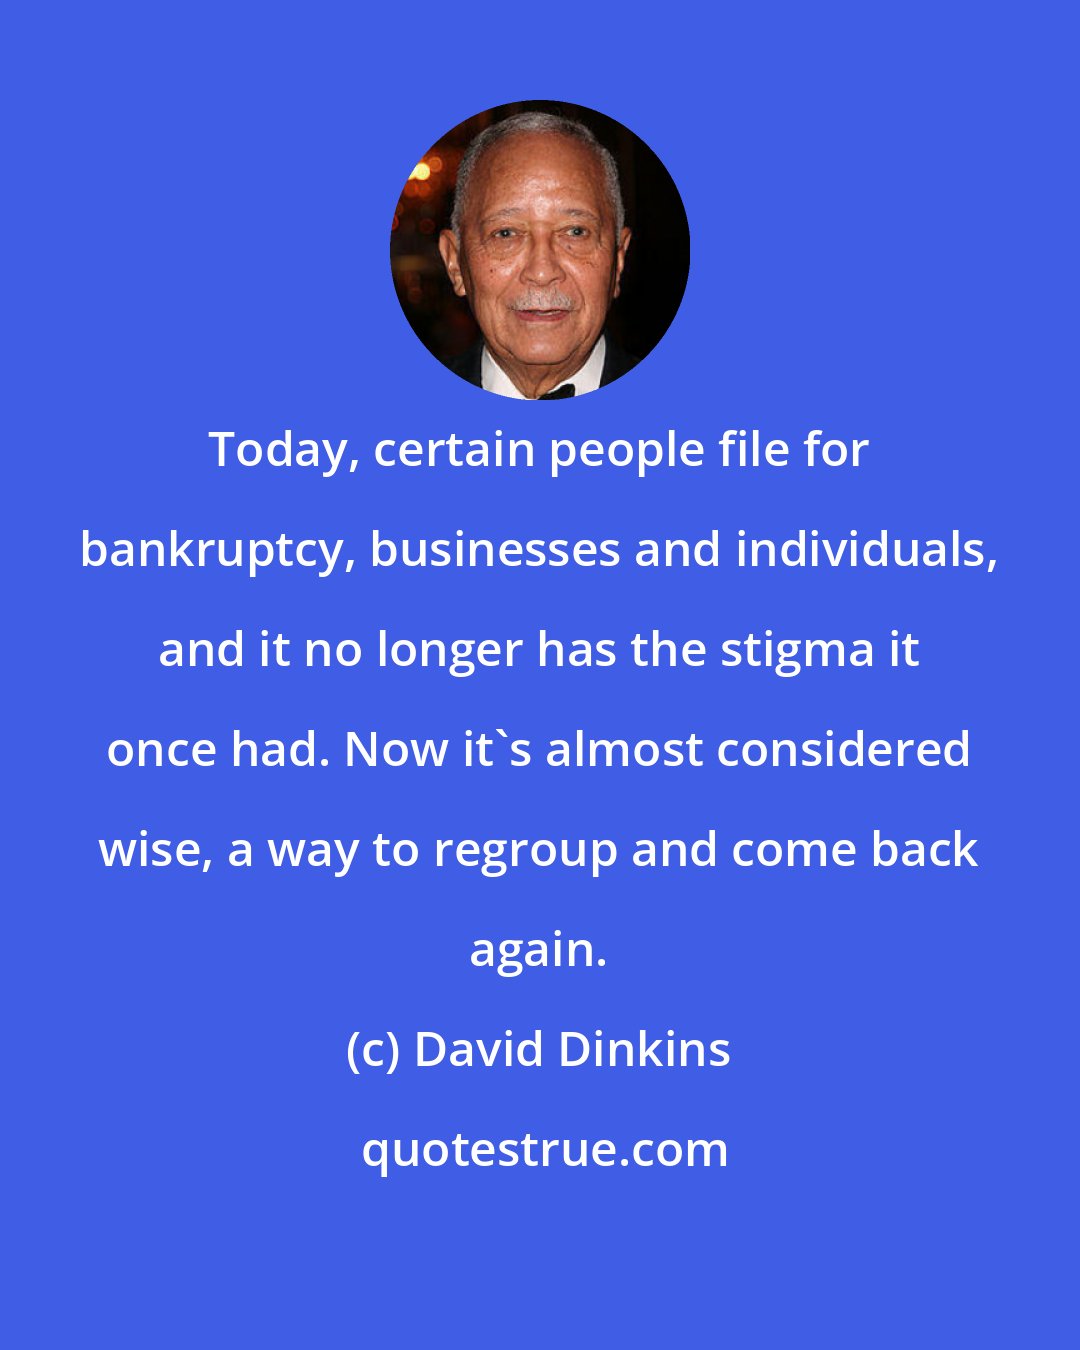 David Dinkins: Today, certain people file for bankruptcy, businesses and individuals, and it no longer has the stigma it once had. Now it's almost considered wise, a way to regroup and come back again.